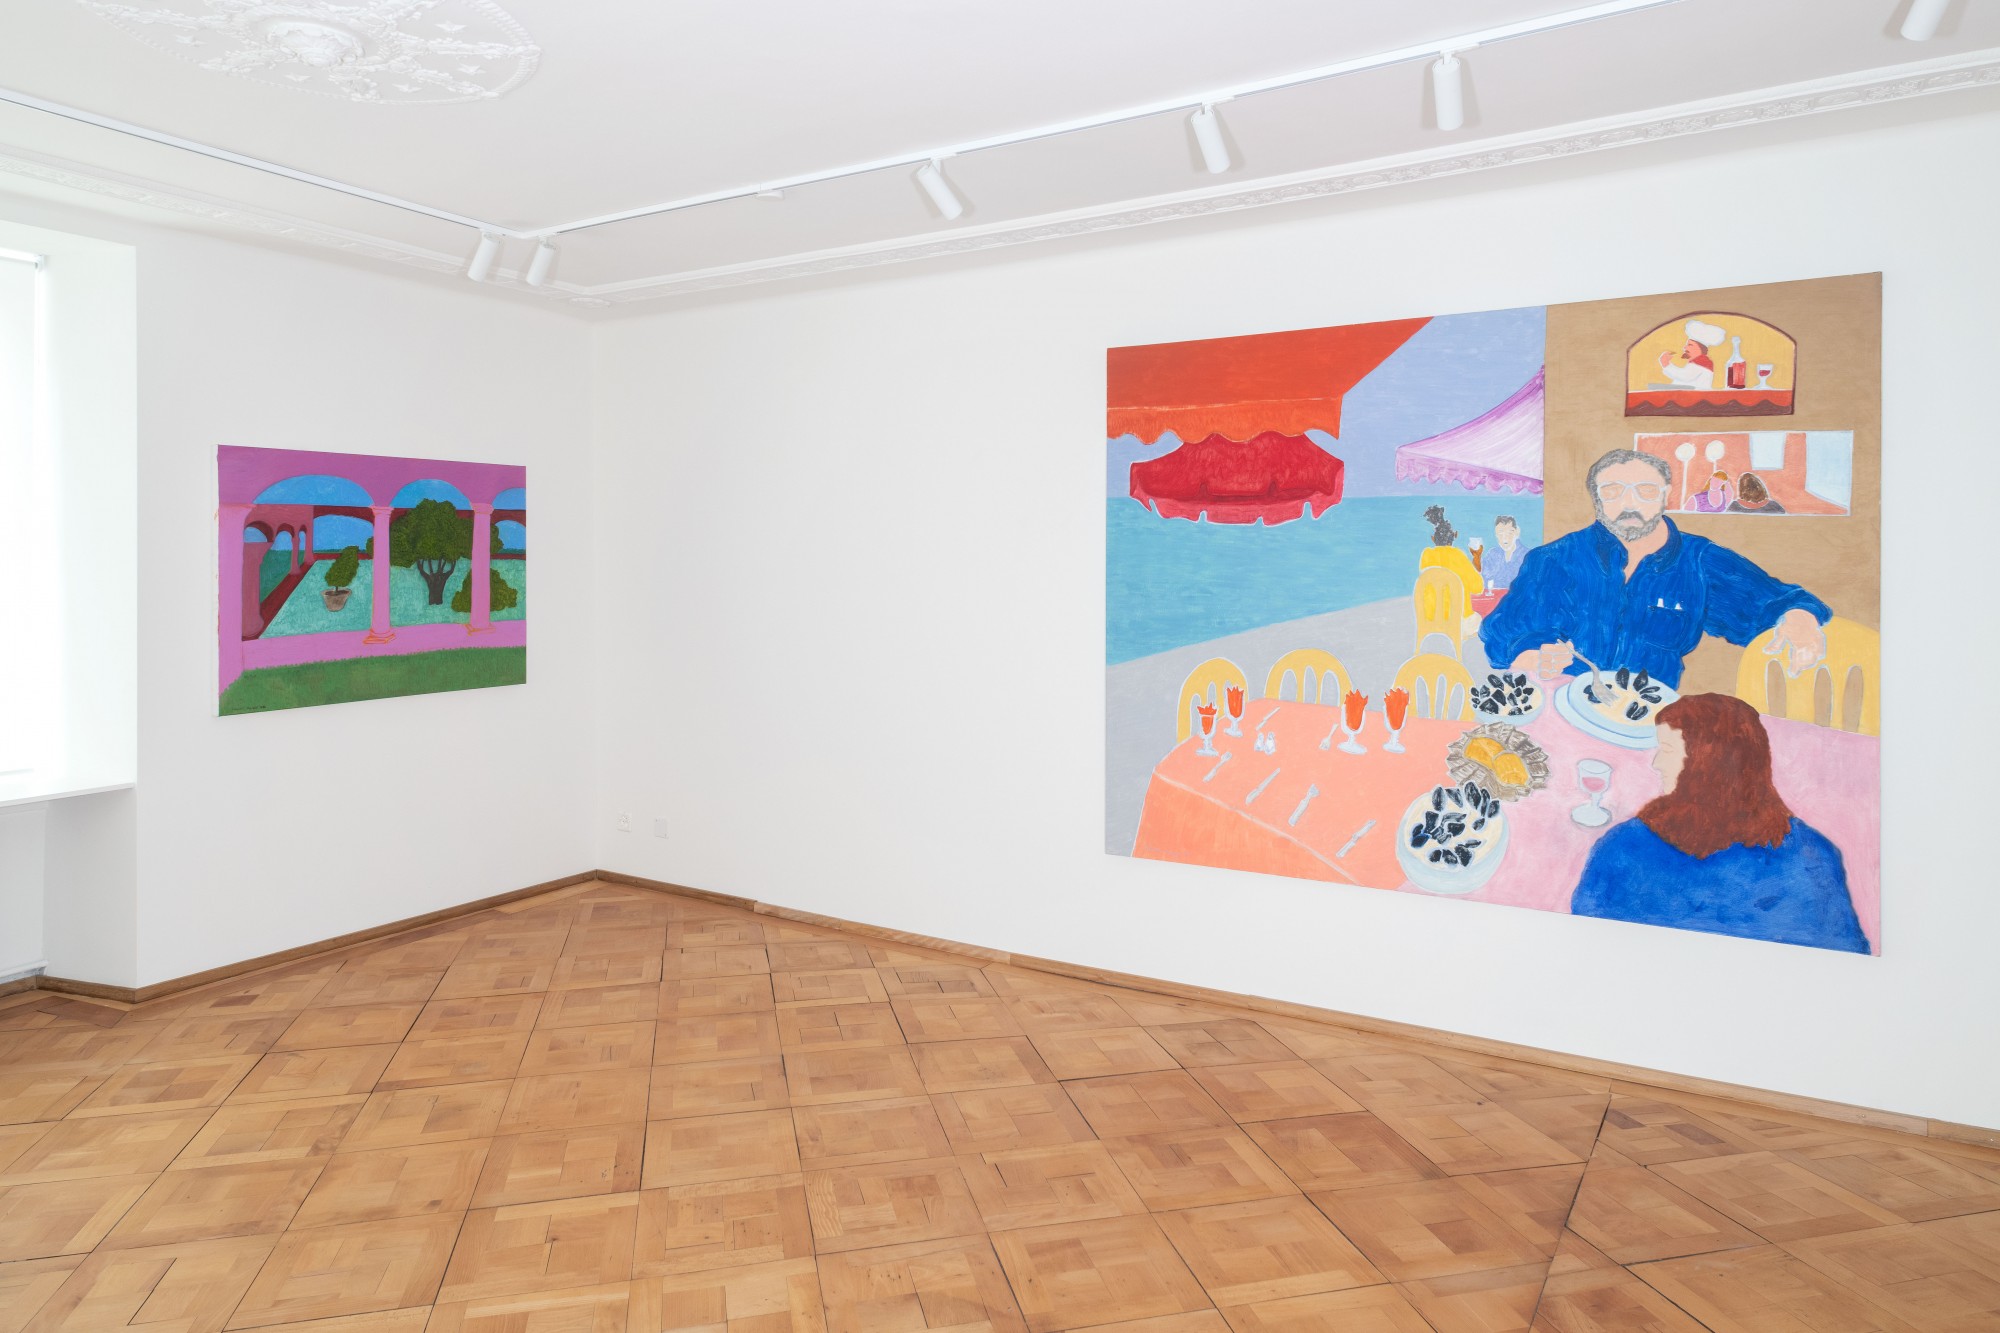 Installation view. *March Avery, Who We Are*. 17 September - 18 November at Rämistrasse 30, 8001 Zürich